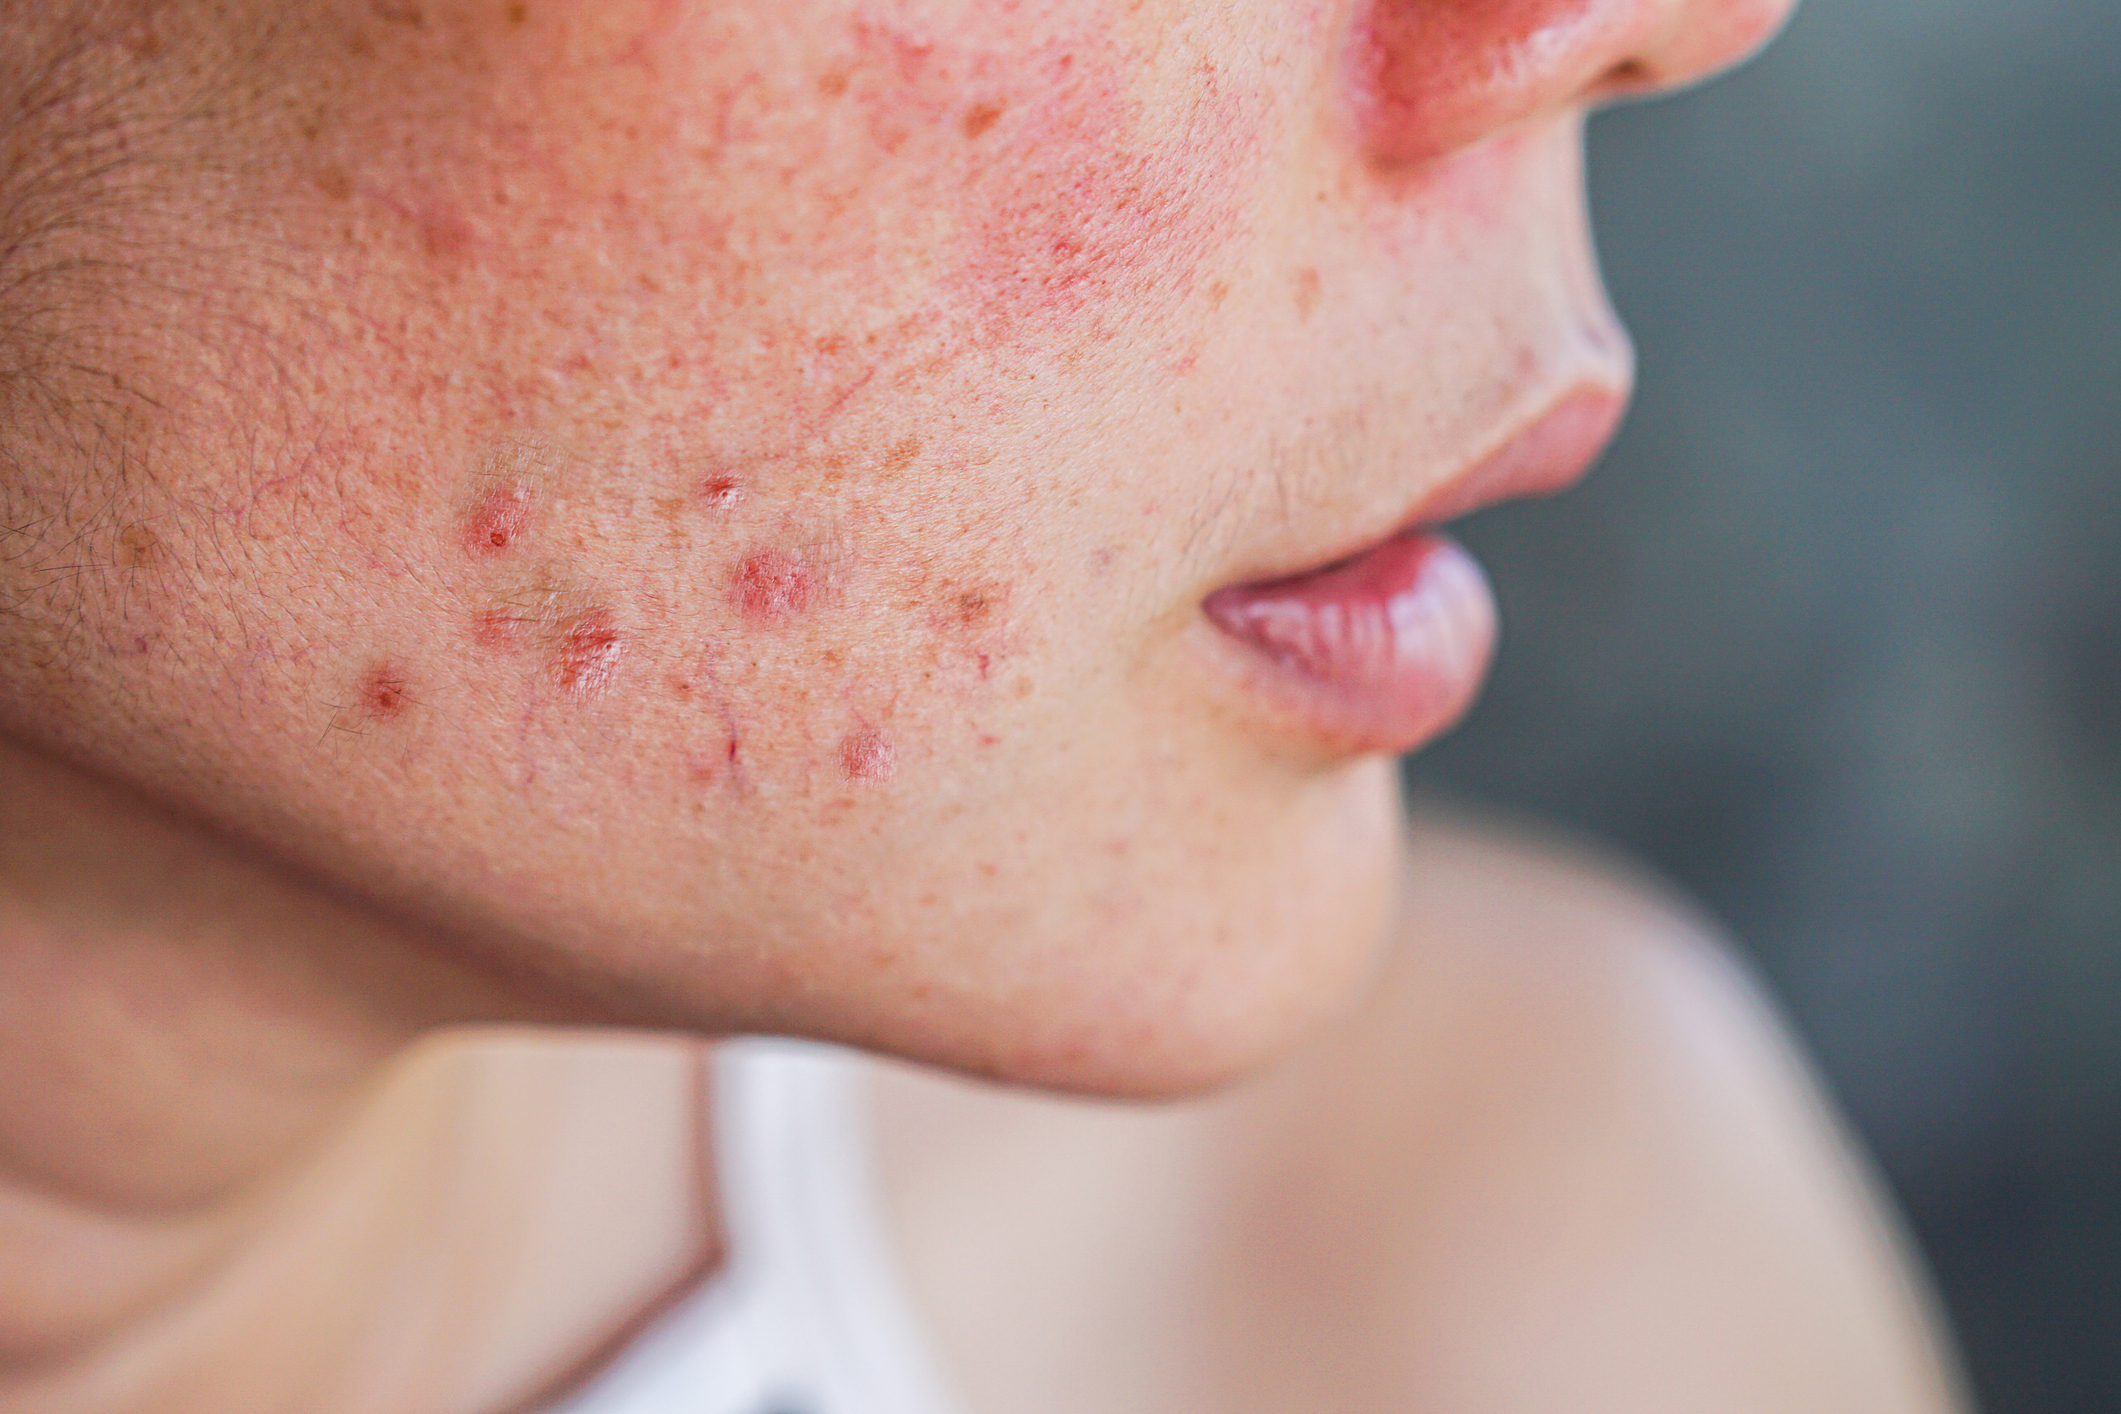 Atopic Dermatitis Patients Treated with Upadacitinib: Characterization of Acne